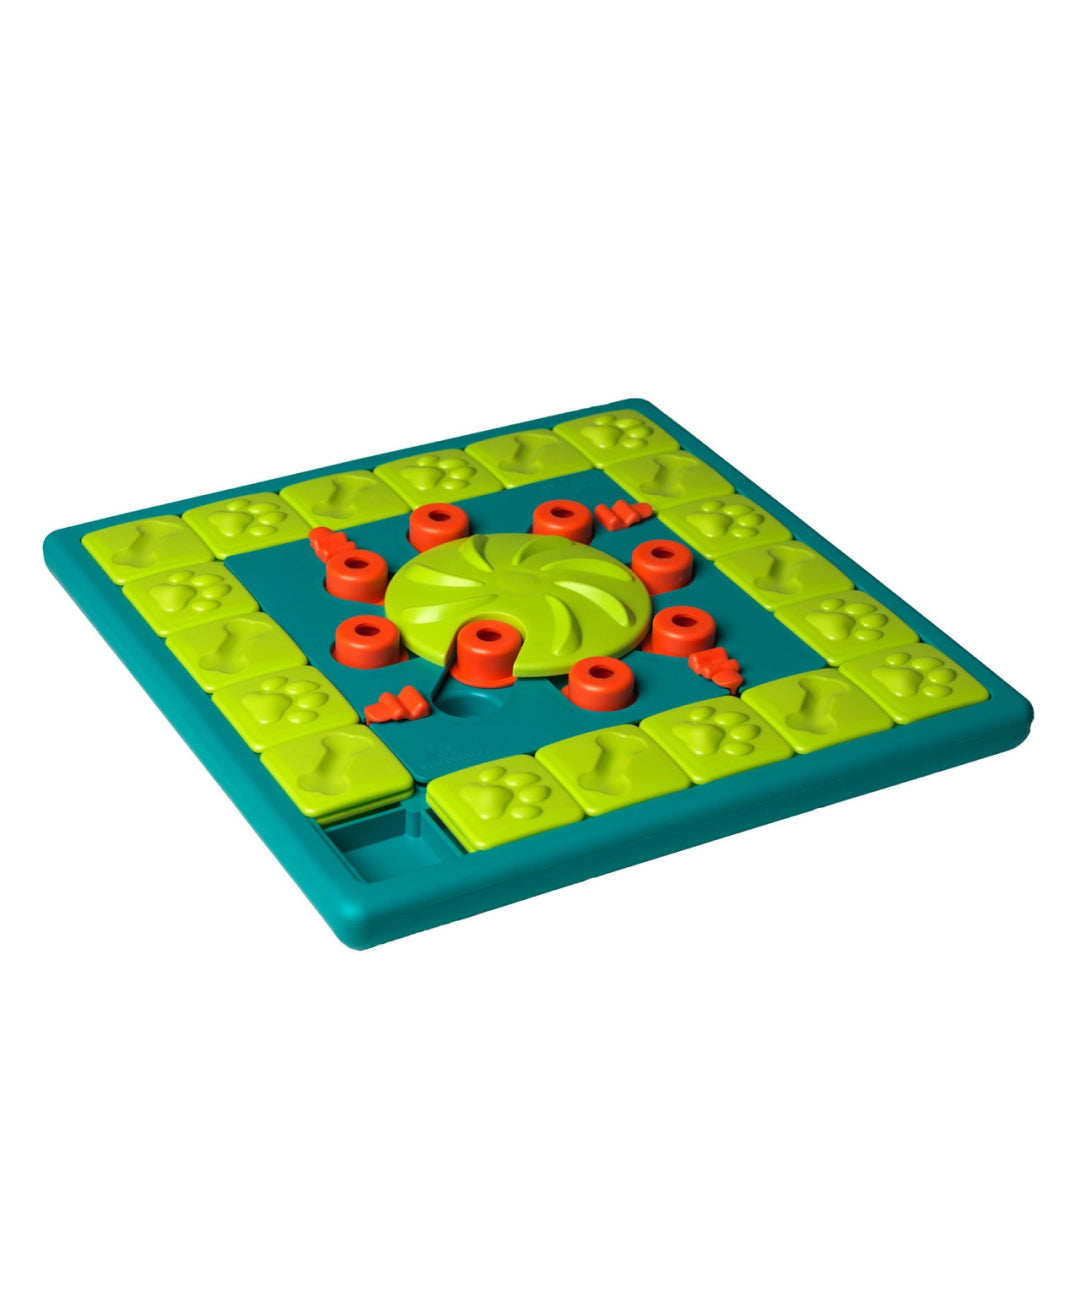 Dog Puzzle Toys, Dog Puzzles for Smart Dogs, Puppy Puzzle Toys